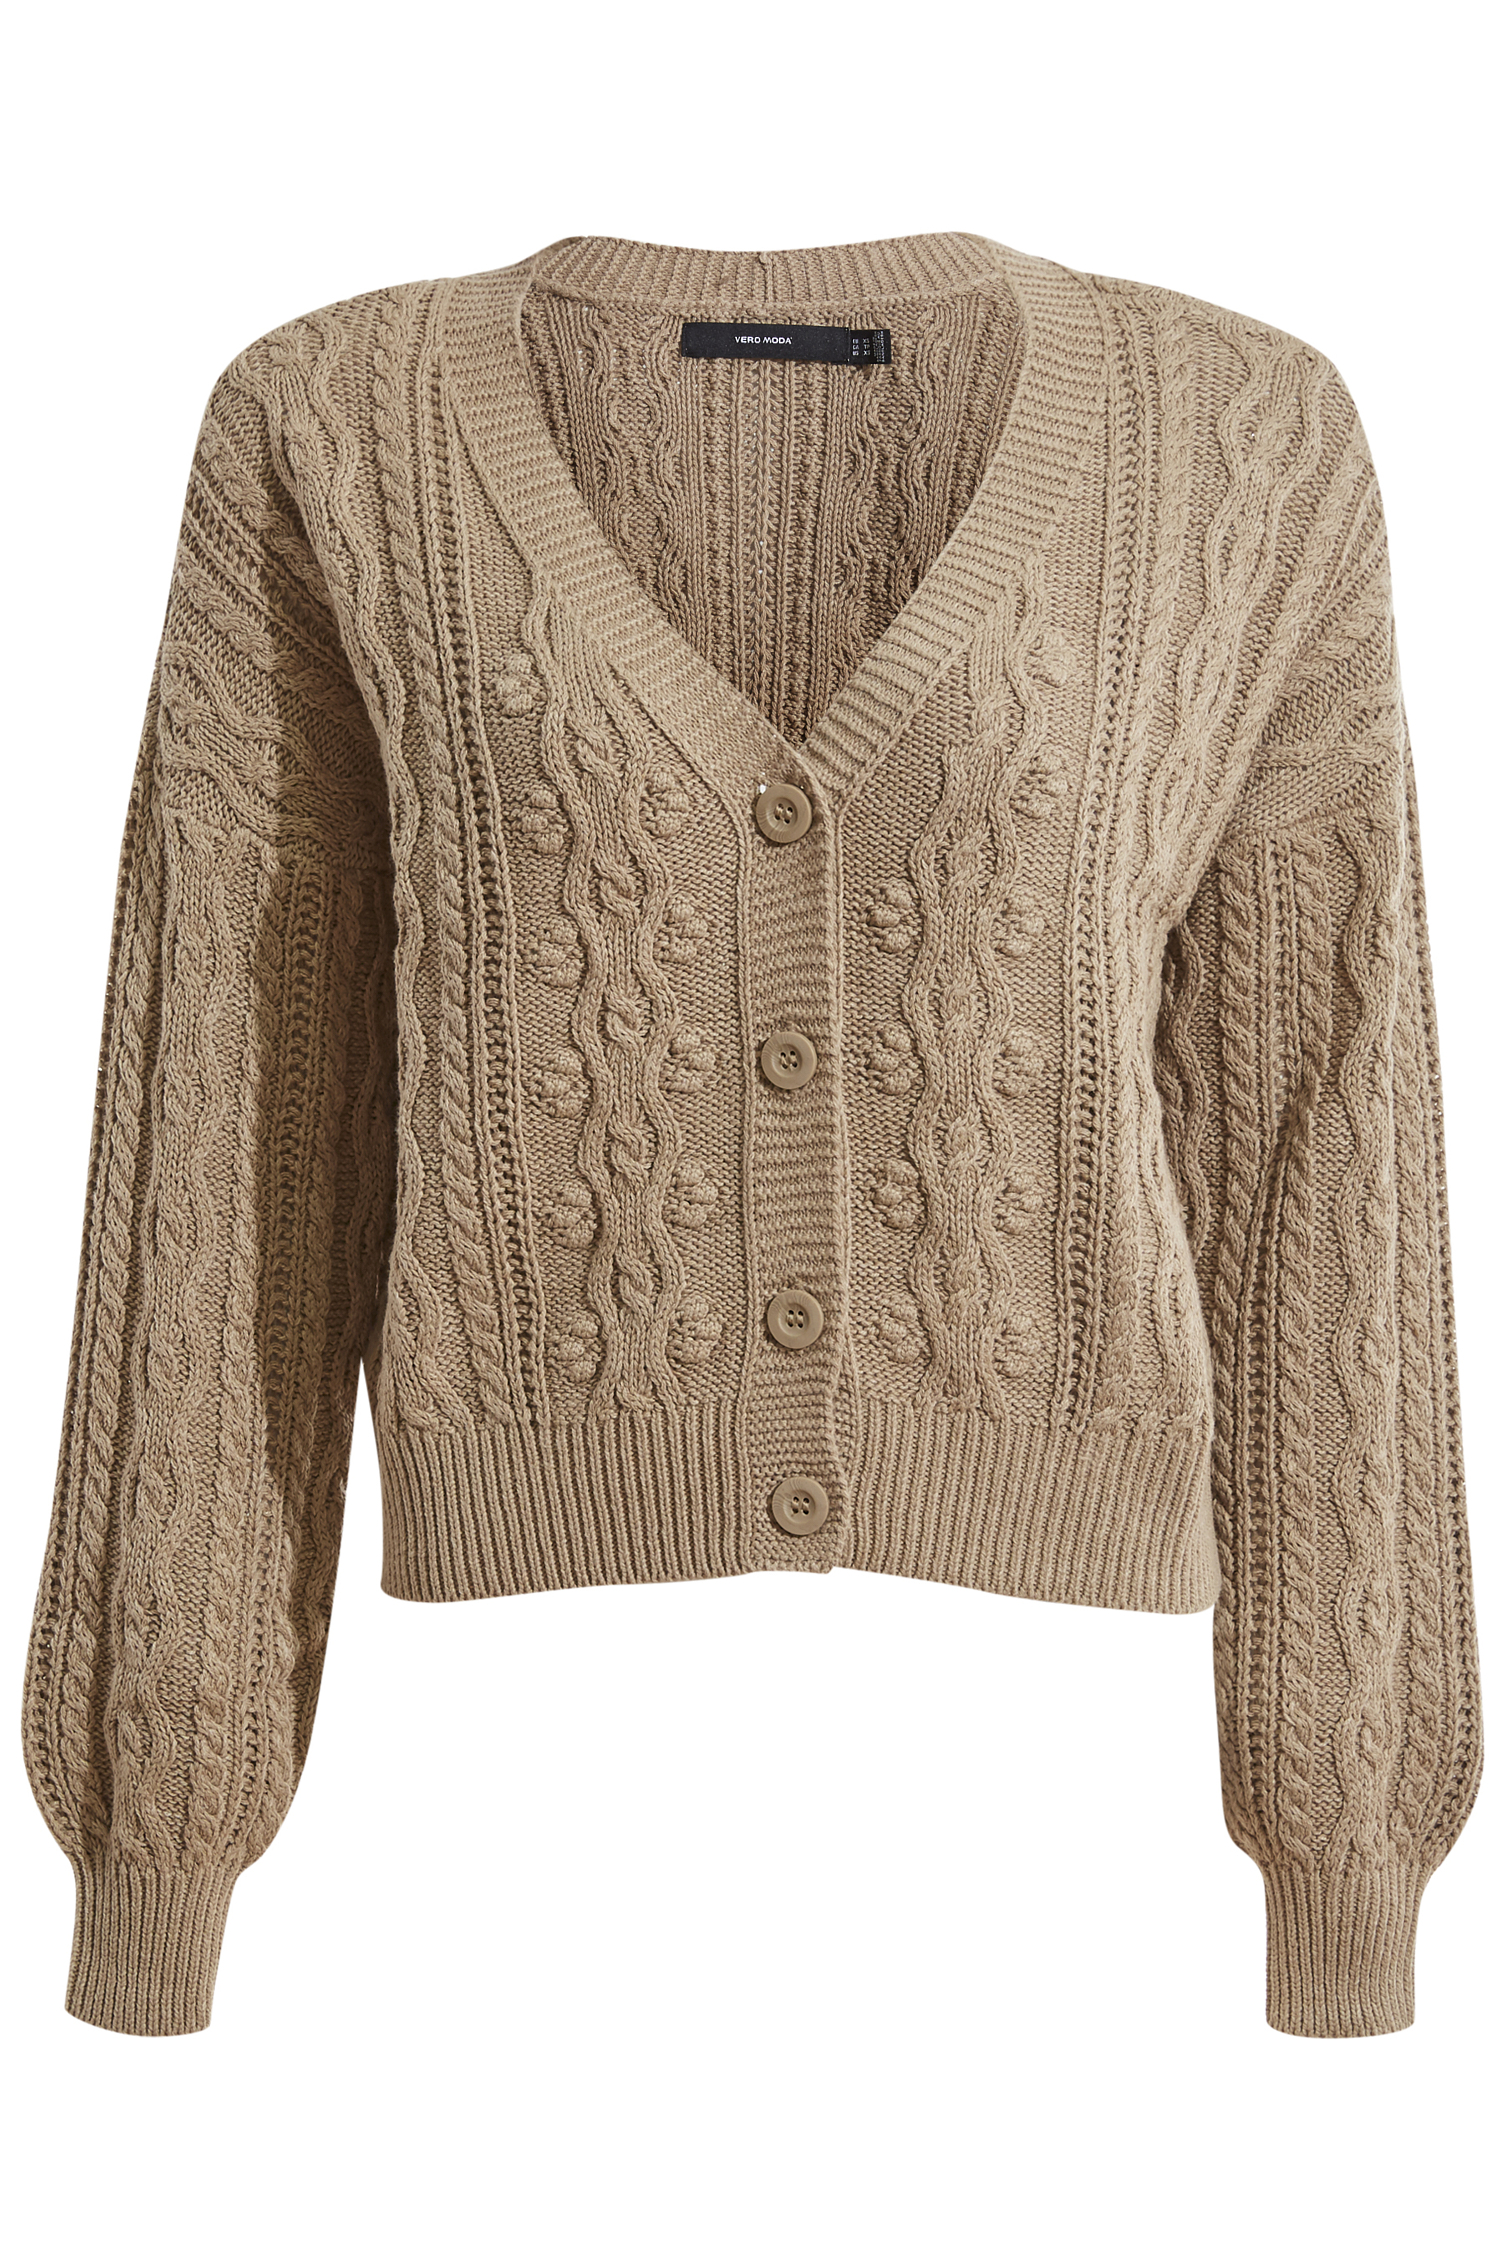 Knit Cardigan in Taupe | DAILYLOOK